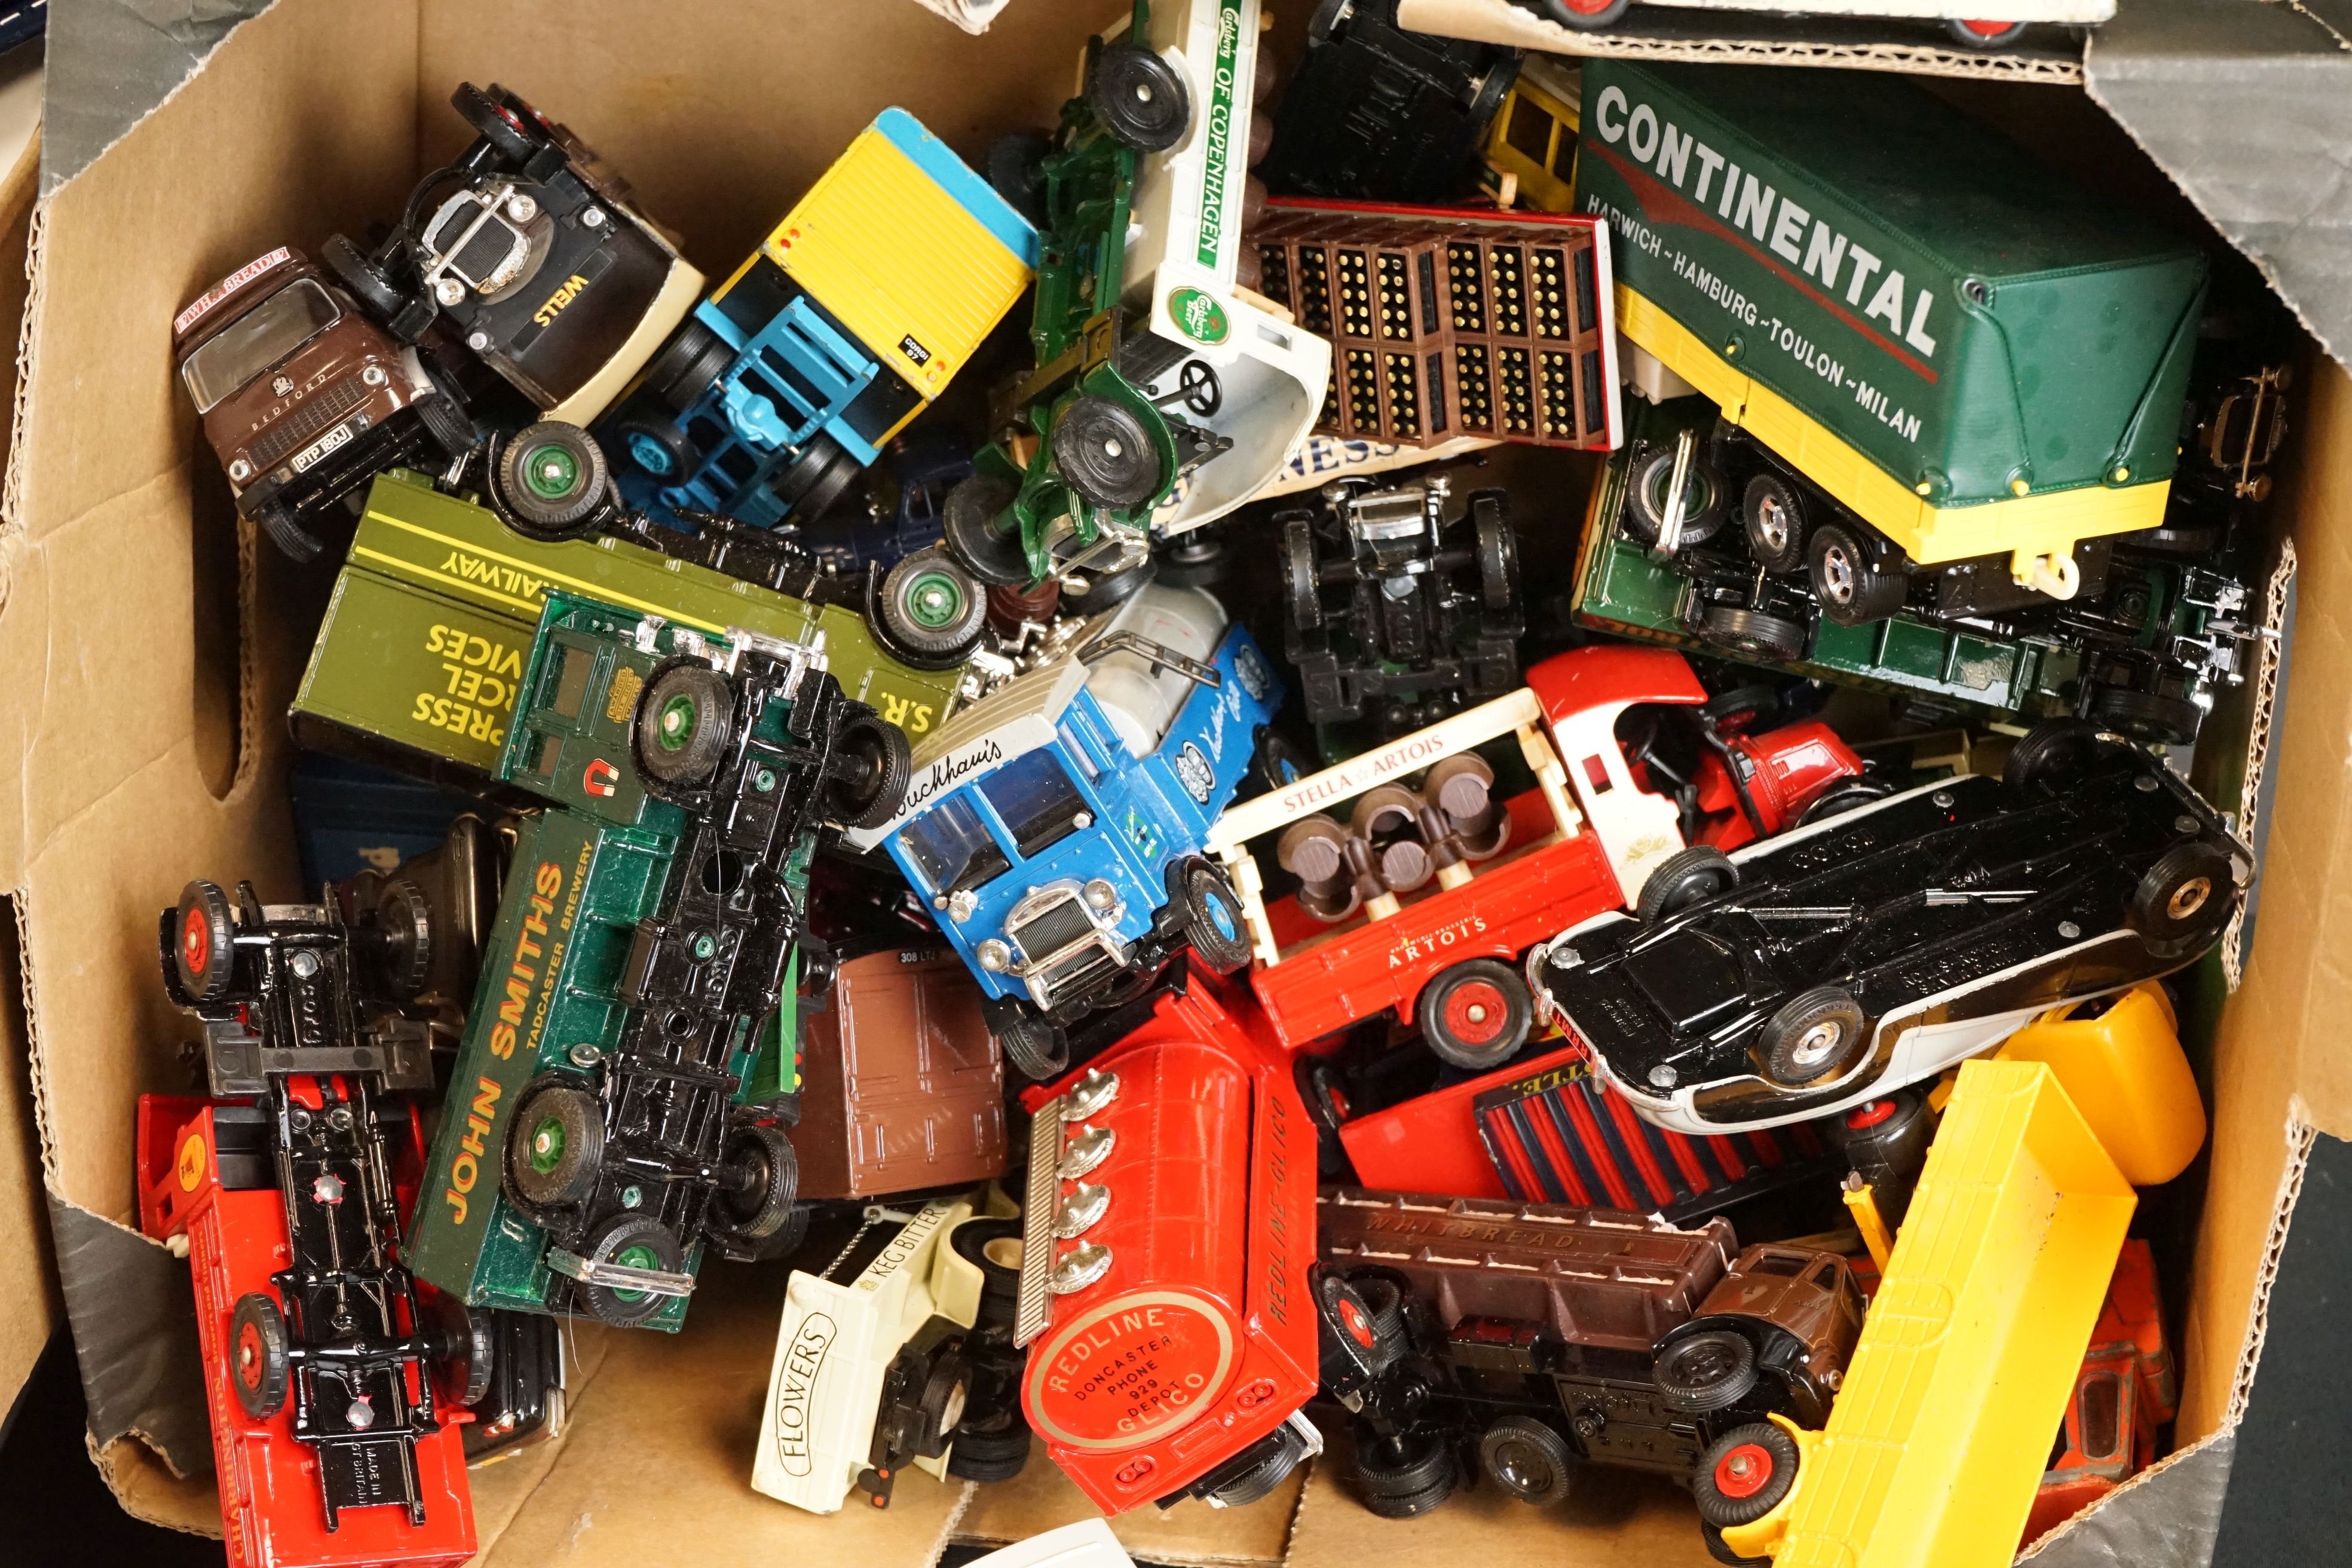 Large quantity of play worn diecast models, many commercial vehicles, to include Corgi, Dinky, - Image 2 of 7